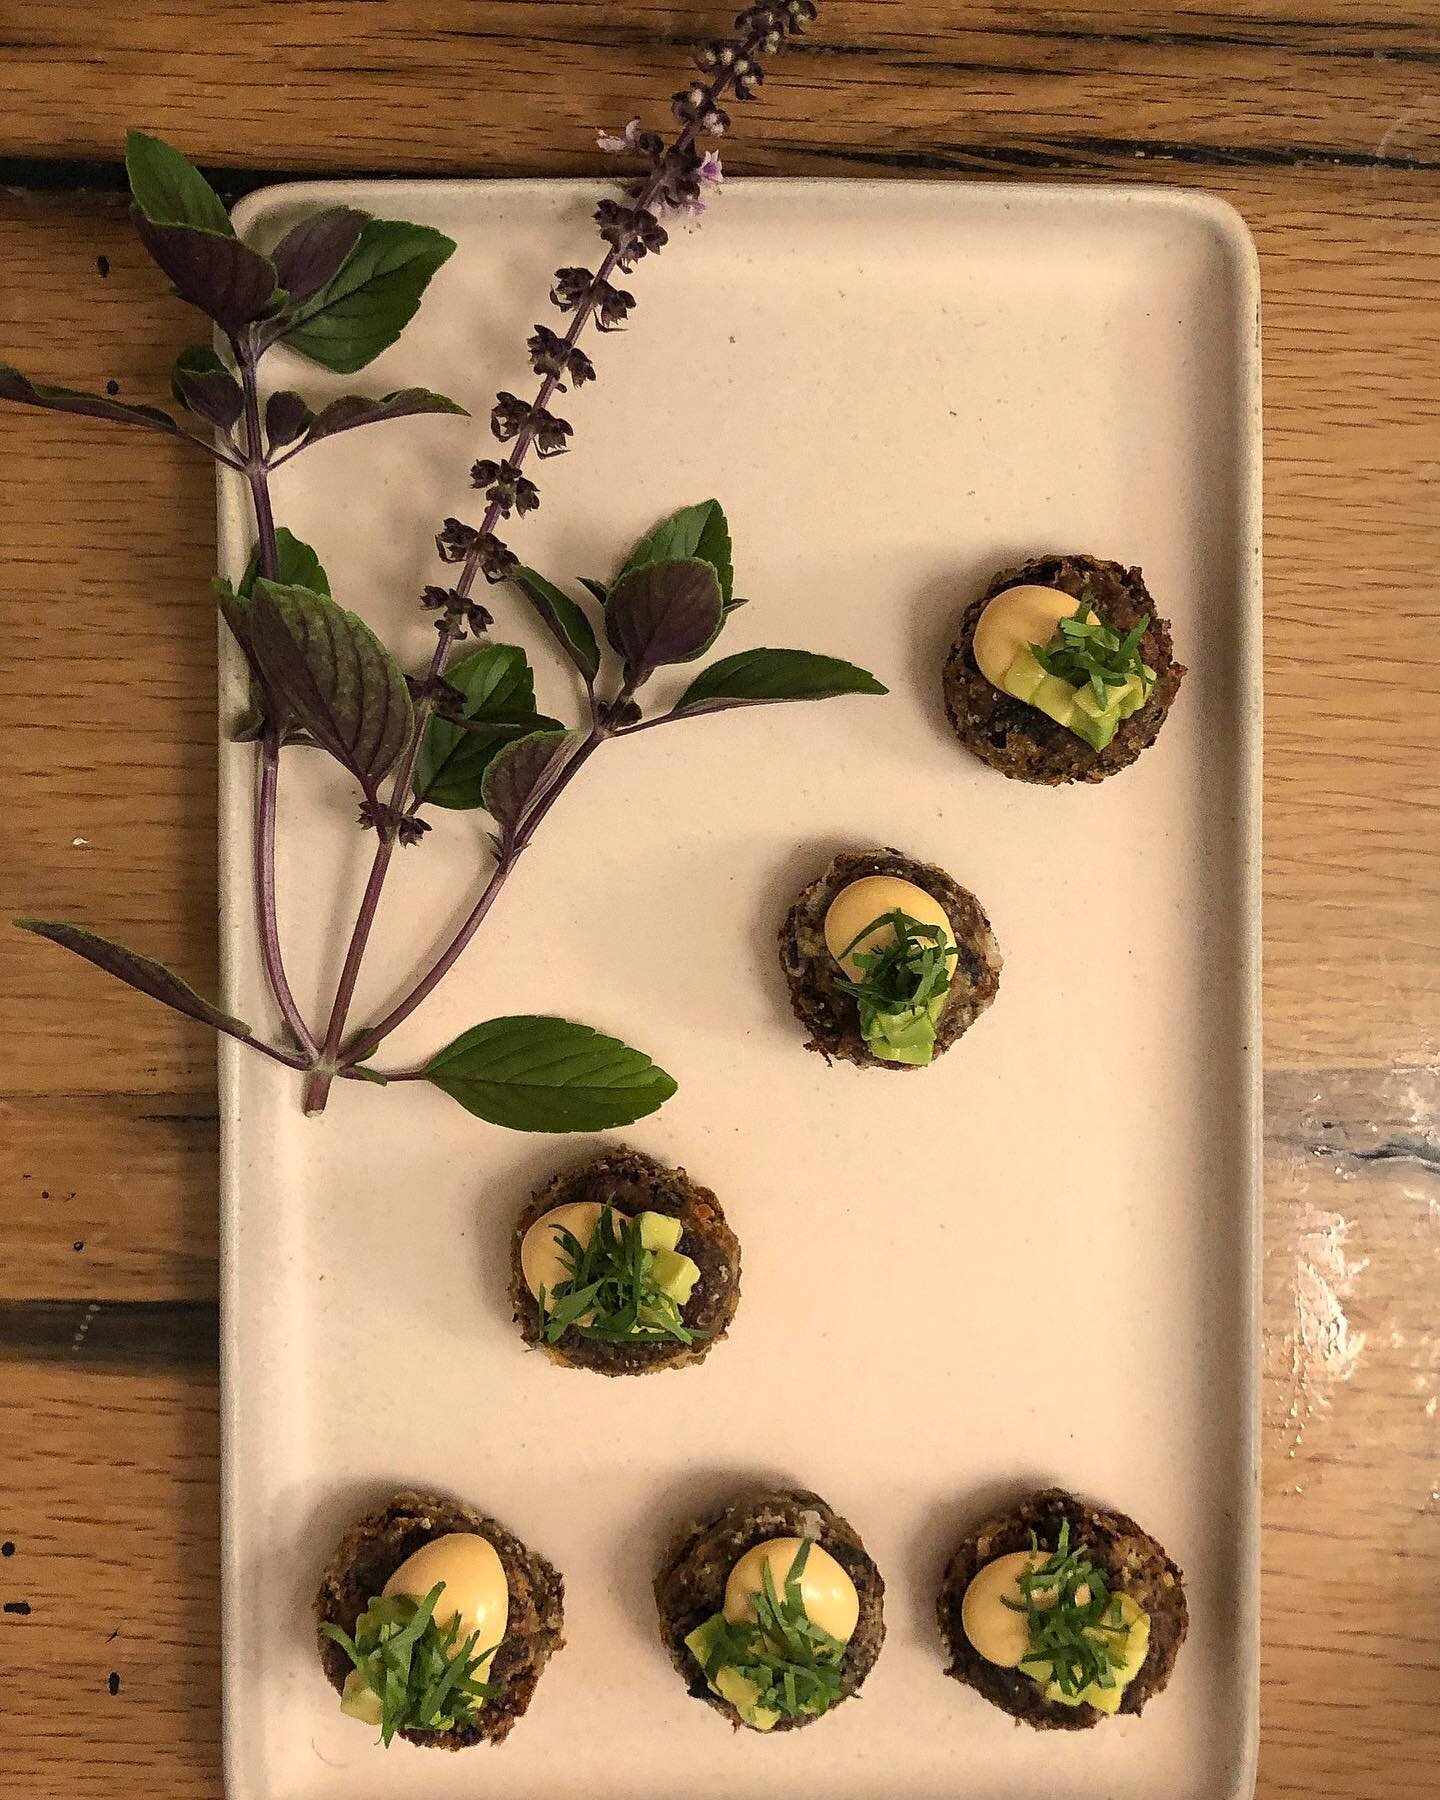 Black bean quinoa cakes with chipotle and avocado. Vegan, crunchy, spicy and oh so delicious.

Passed canap&eacute; at one of our events this week @home_grown_meals 

#vegan #yummy #food #events #foodporn #blackbean #protein #yum #health #chef #chefl